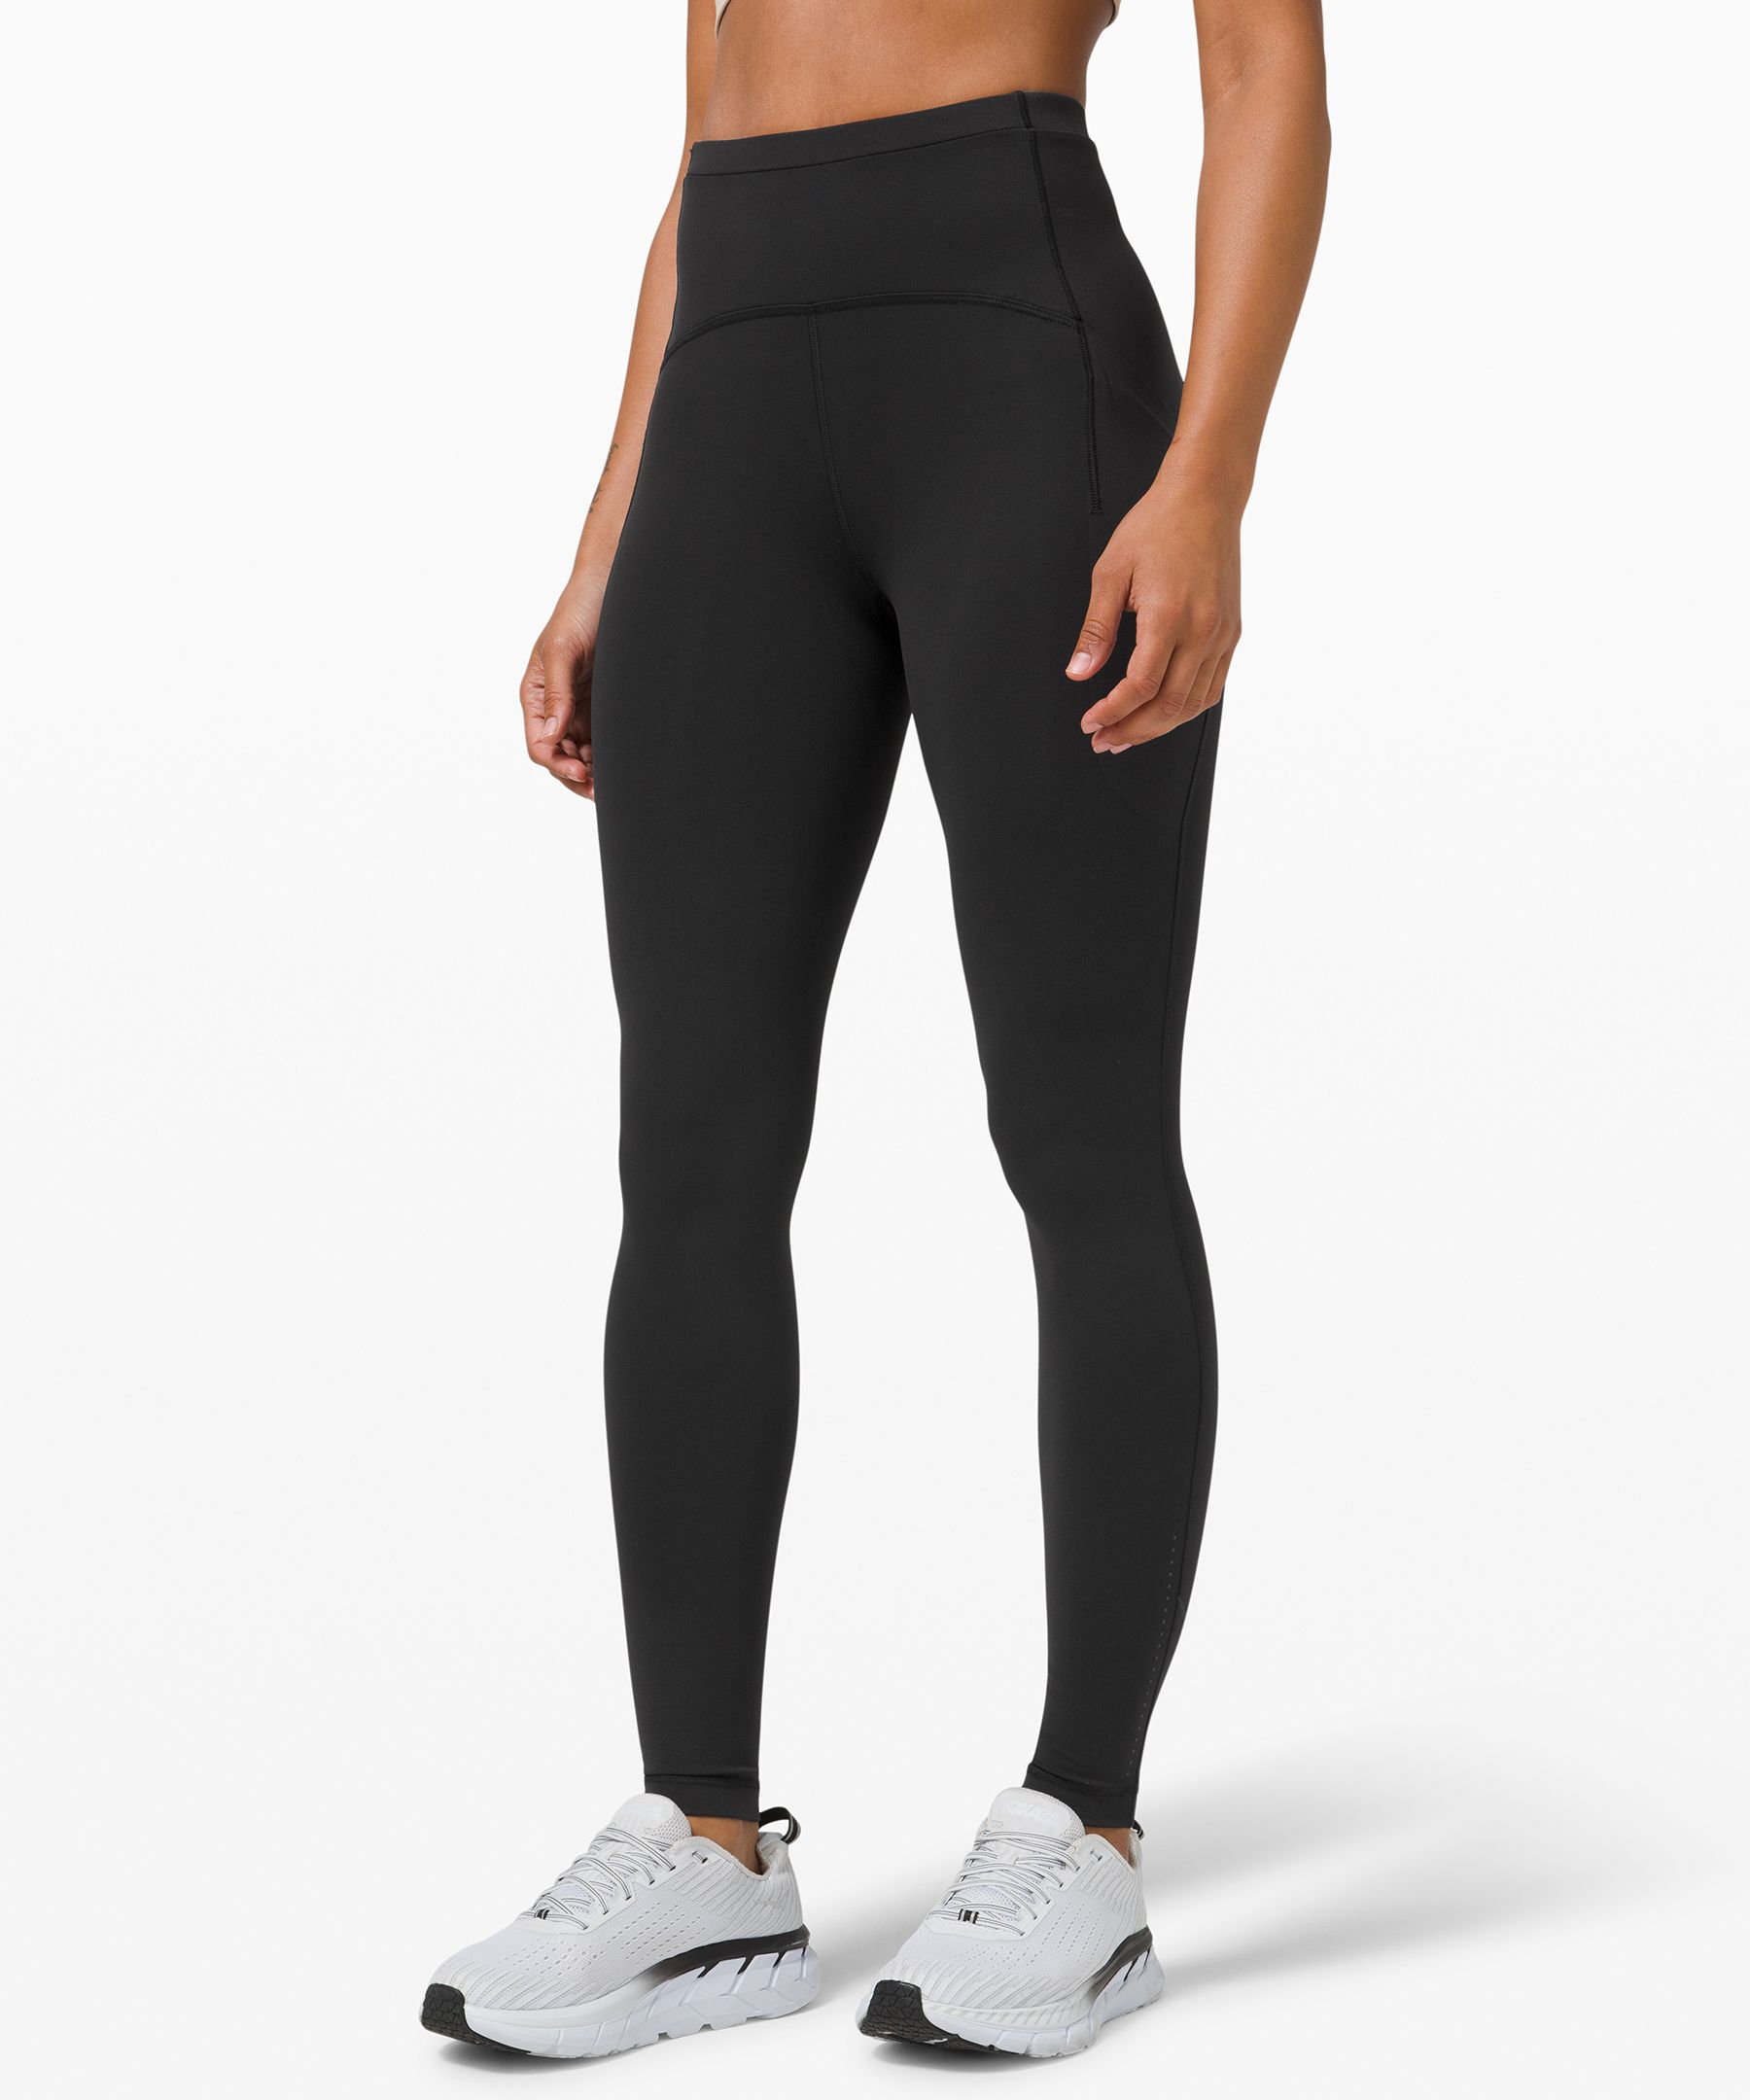 Lululemon Swift speed High Rise Tight leggings 28” in size 10 with pockets